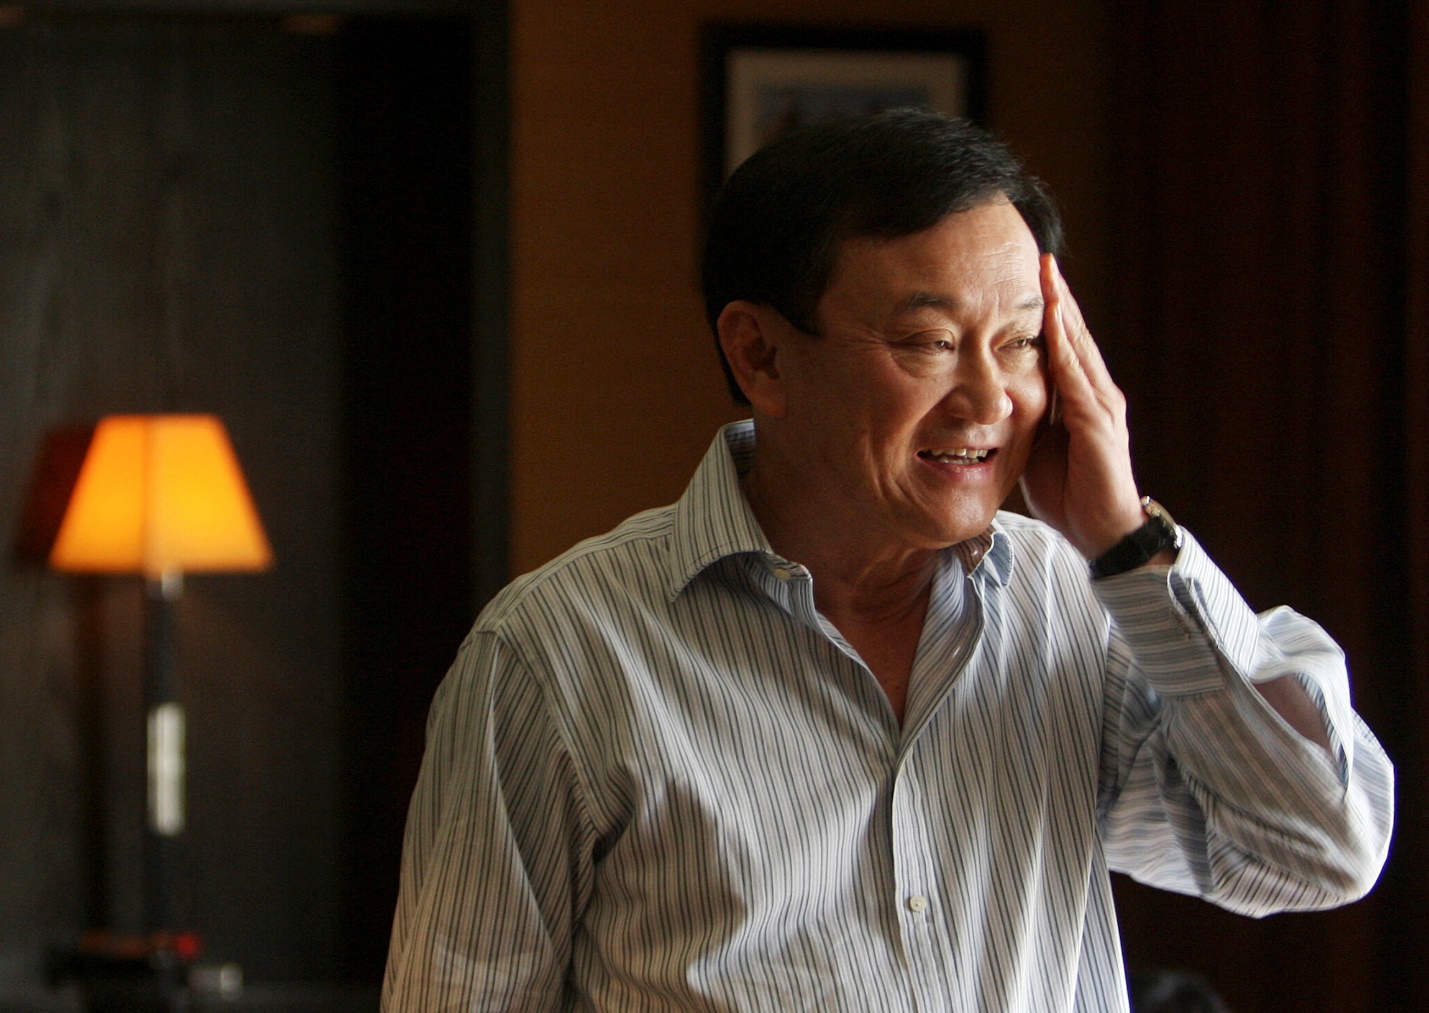 Ms Yingluck posted a farewell photo of former Prime Minister Thaksin Shinawatra - Photo 3.